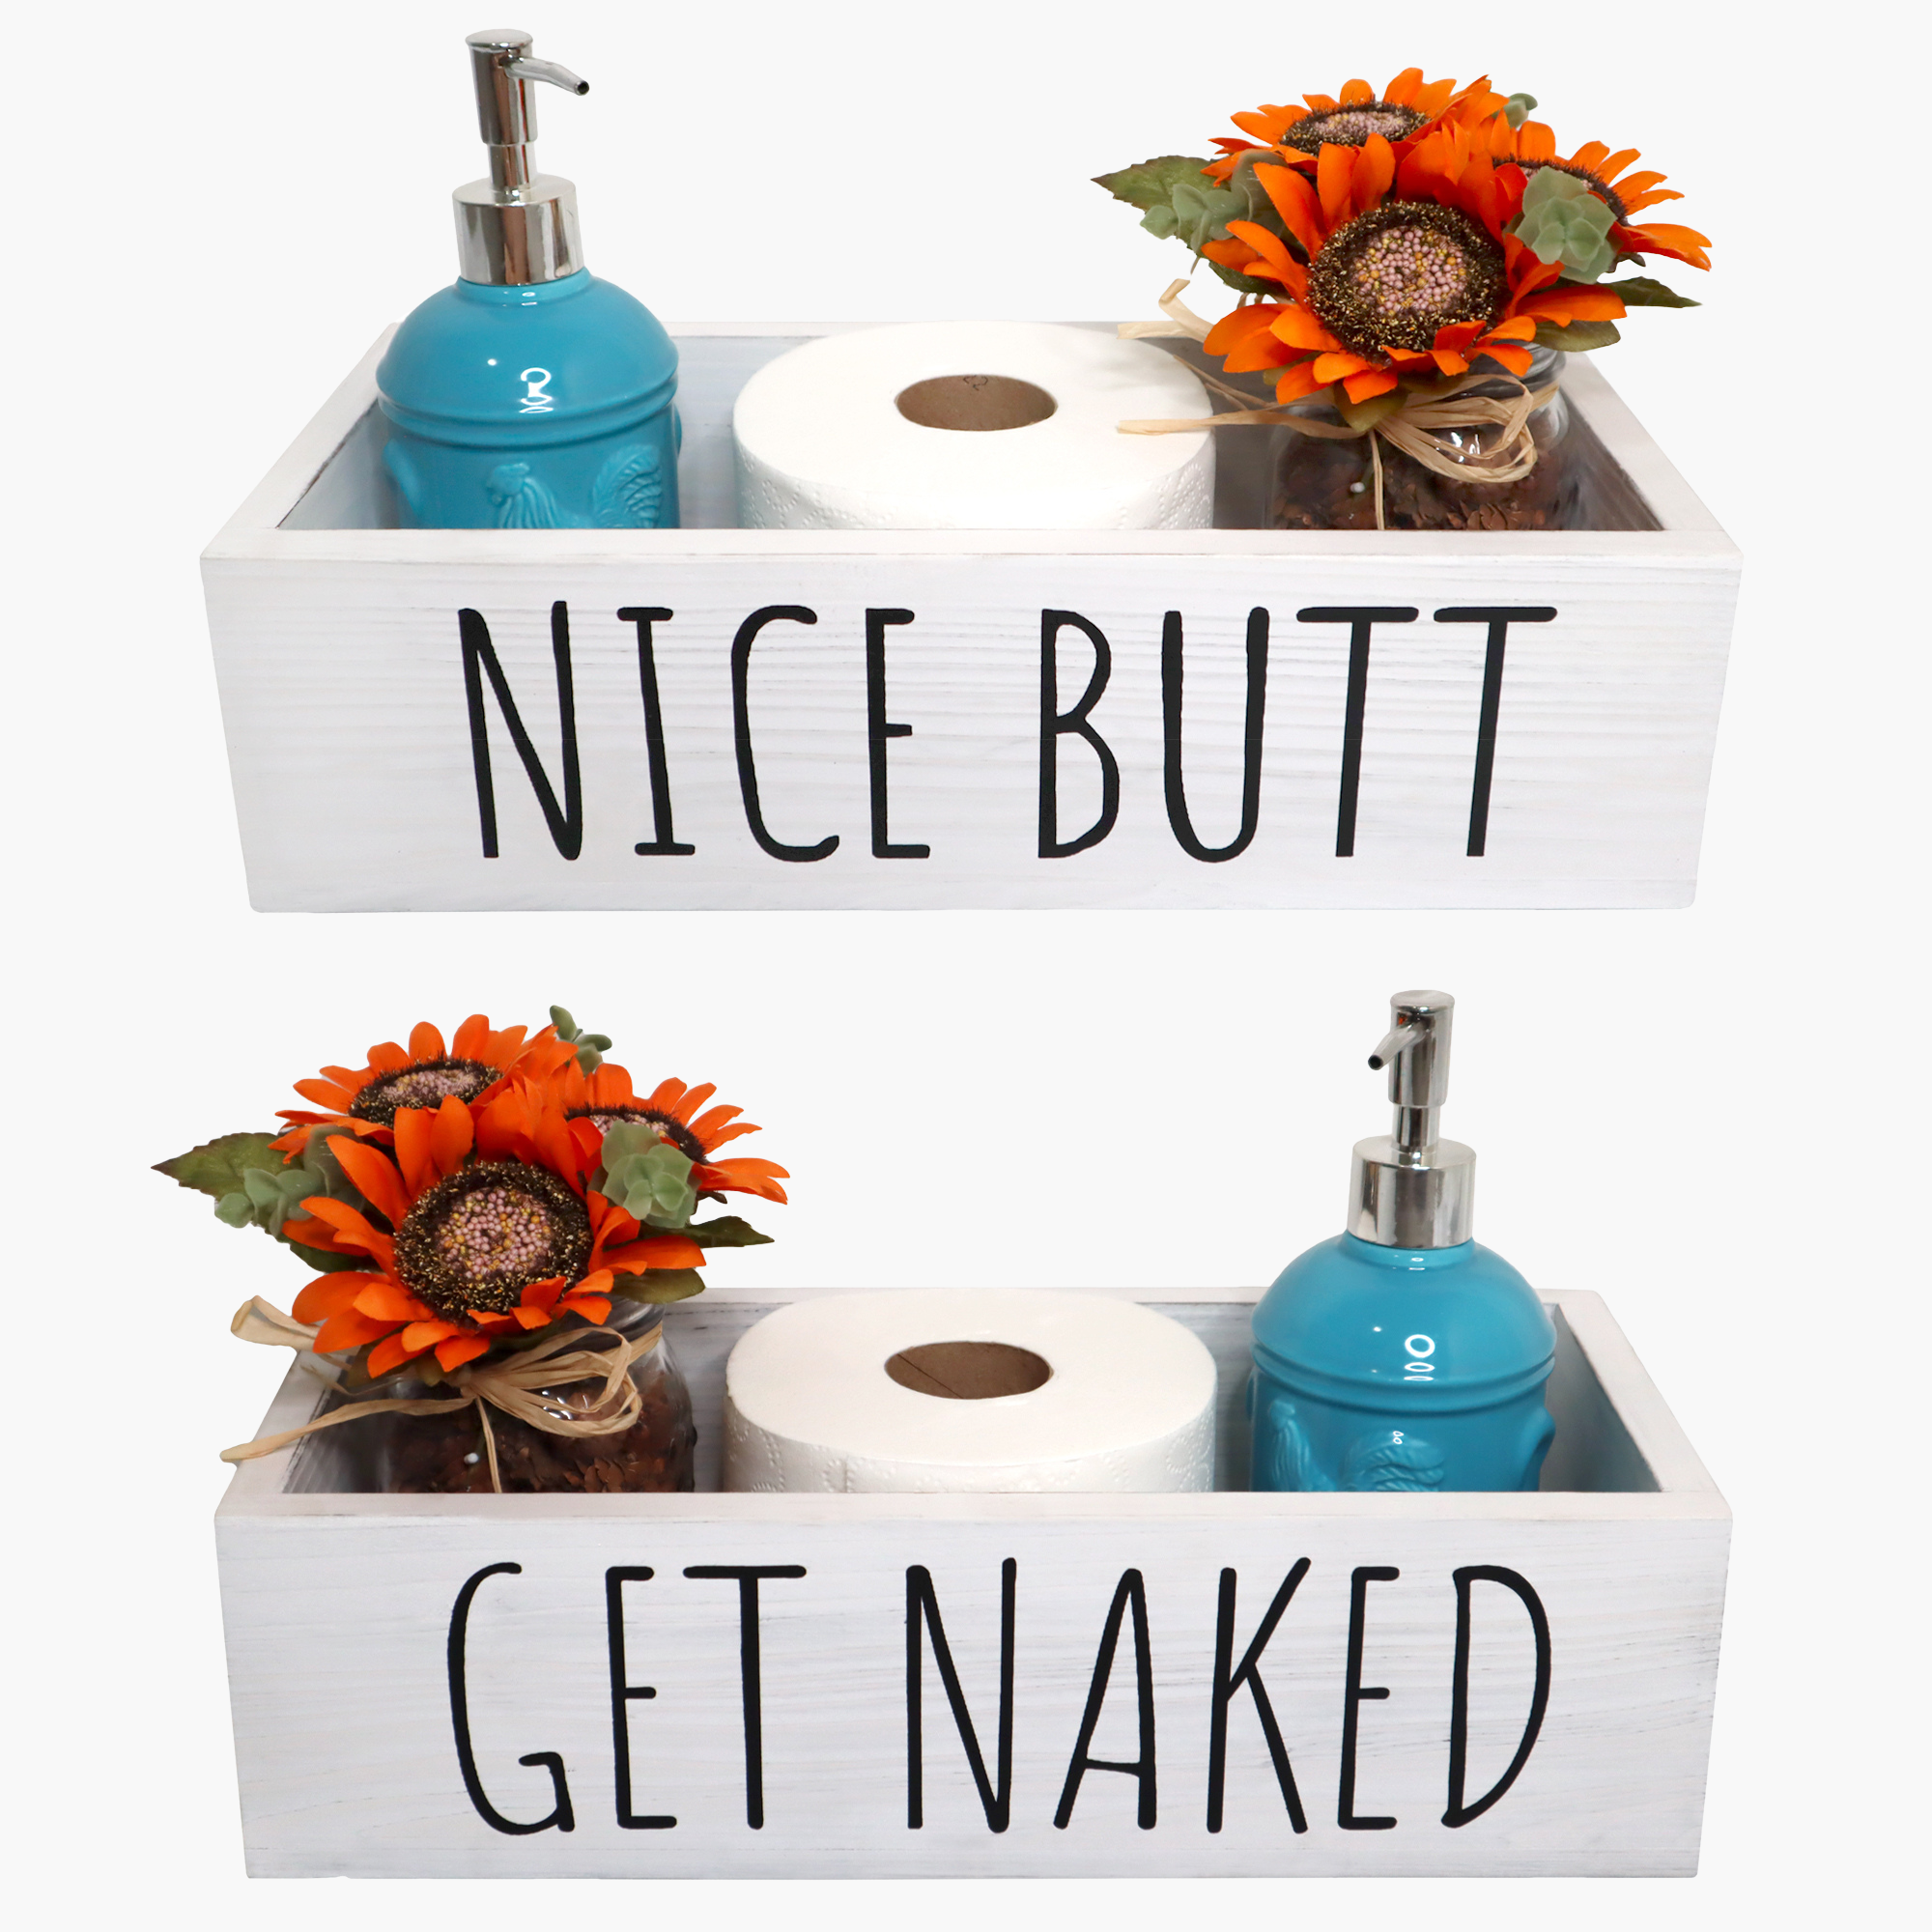 YELLOW LOTUS Nice Butt Bathroom Decor Box - 2 Sides Funny Wooden Toilet Paper Holder